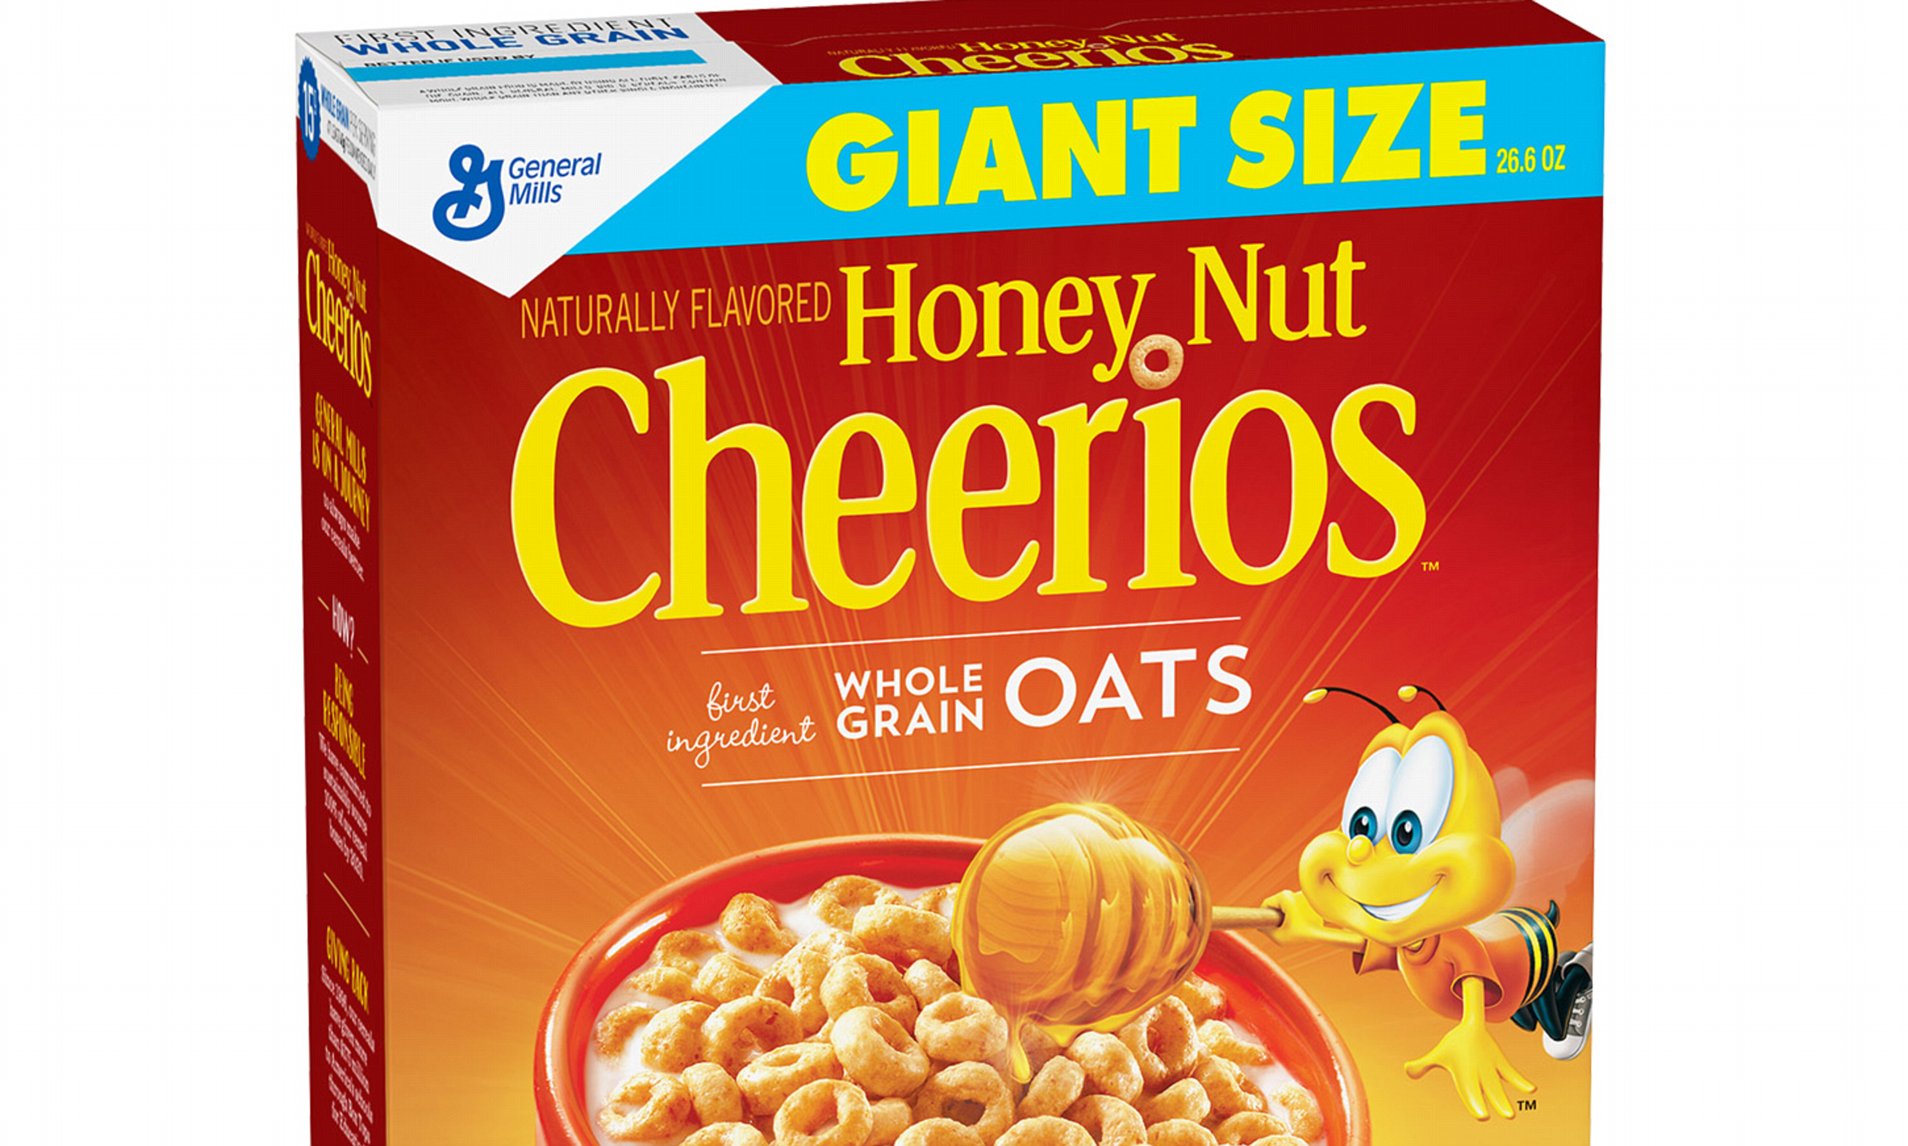 Can You Eat Honey Nut Cheerios While Pregnant